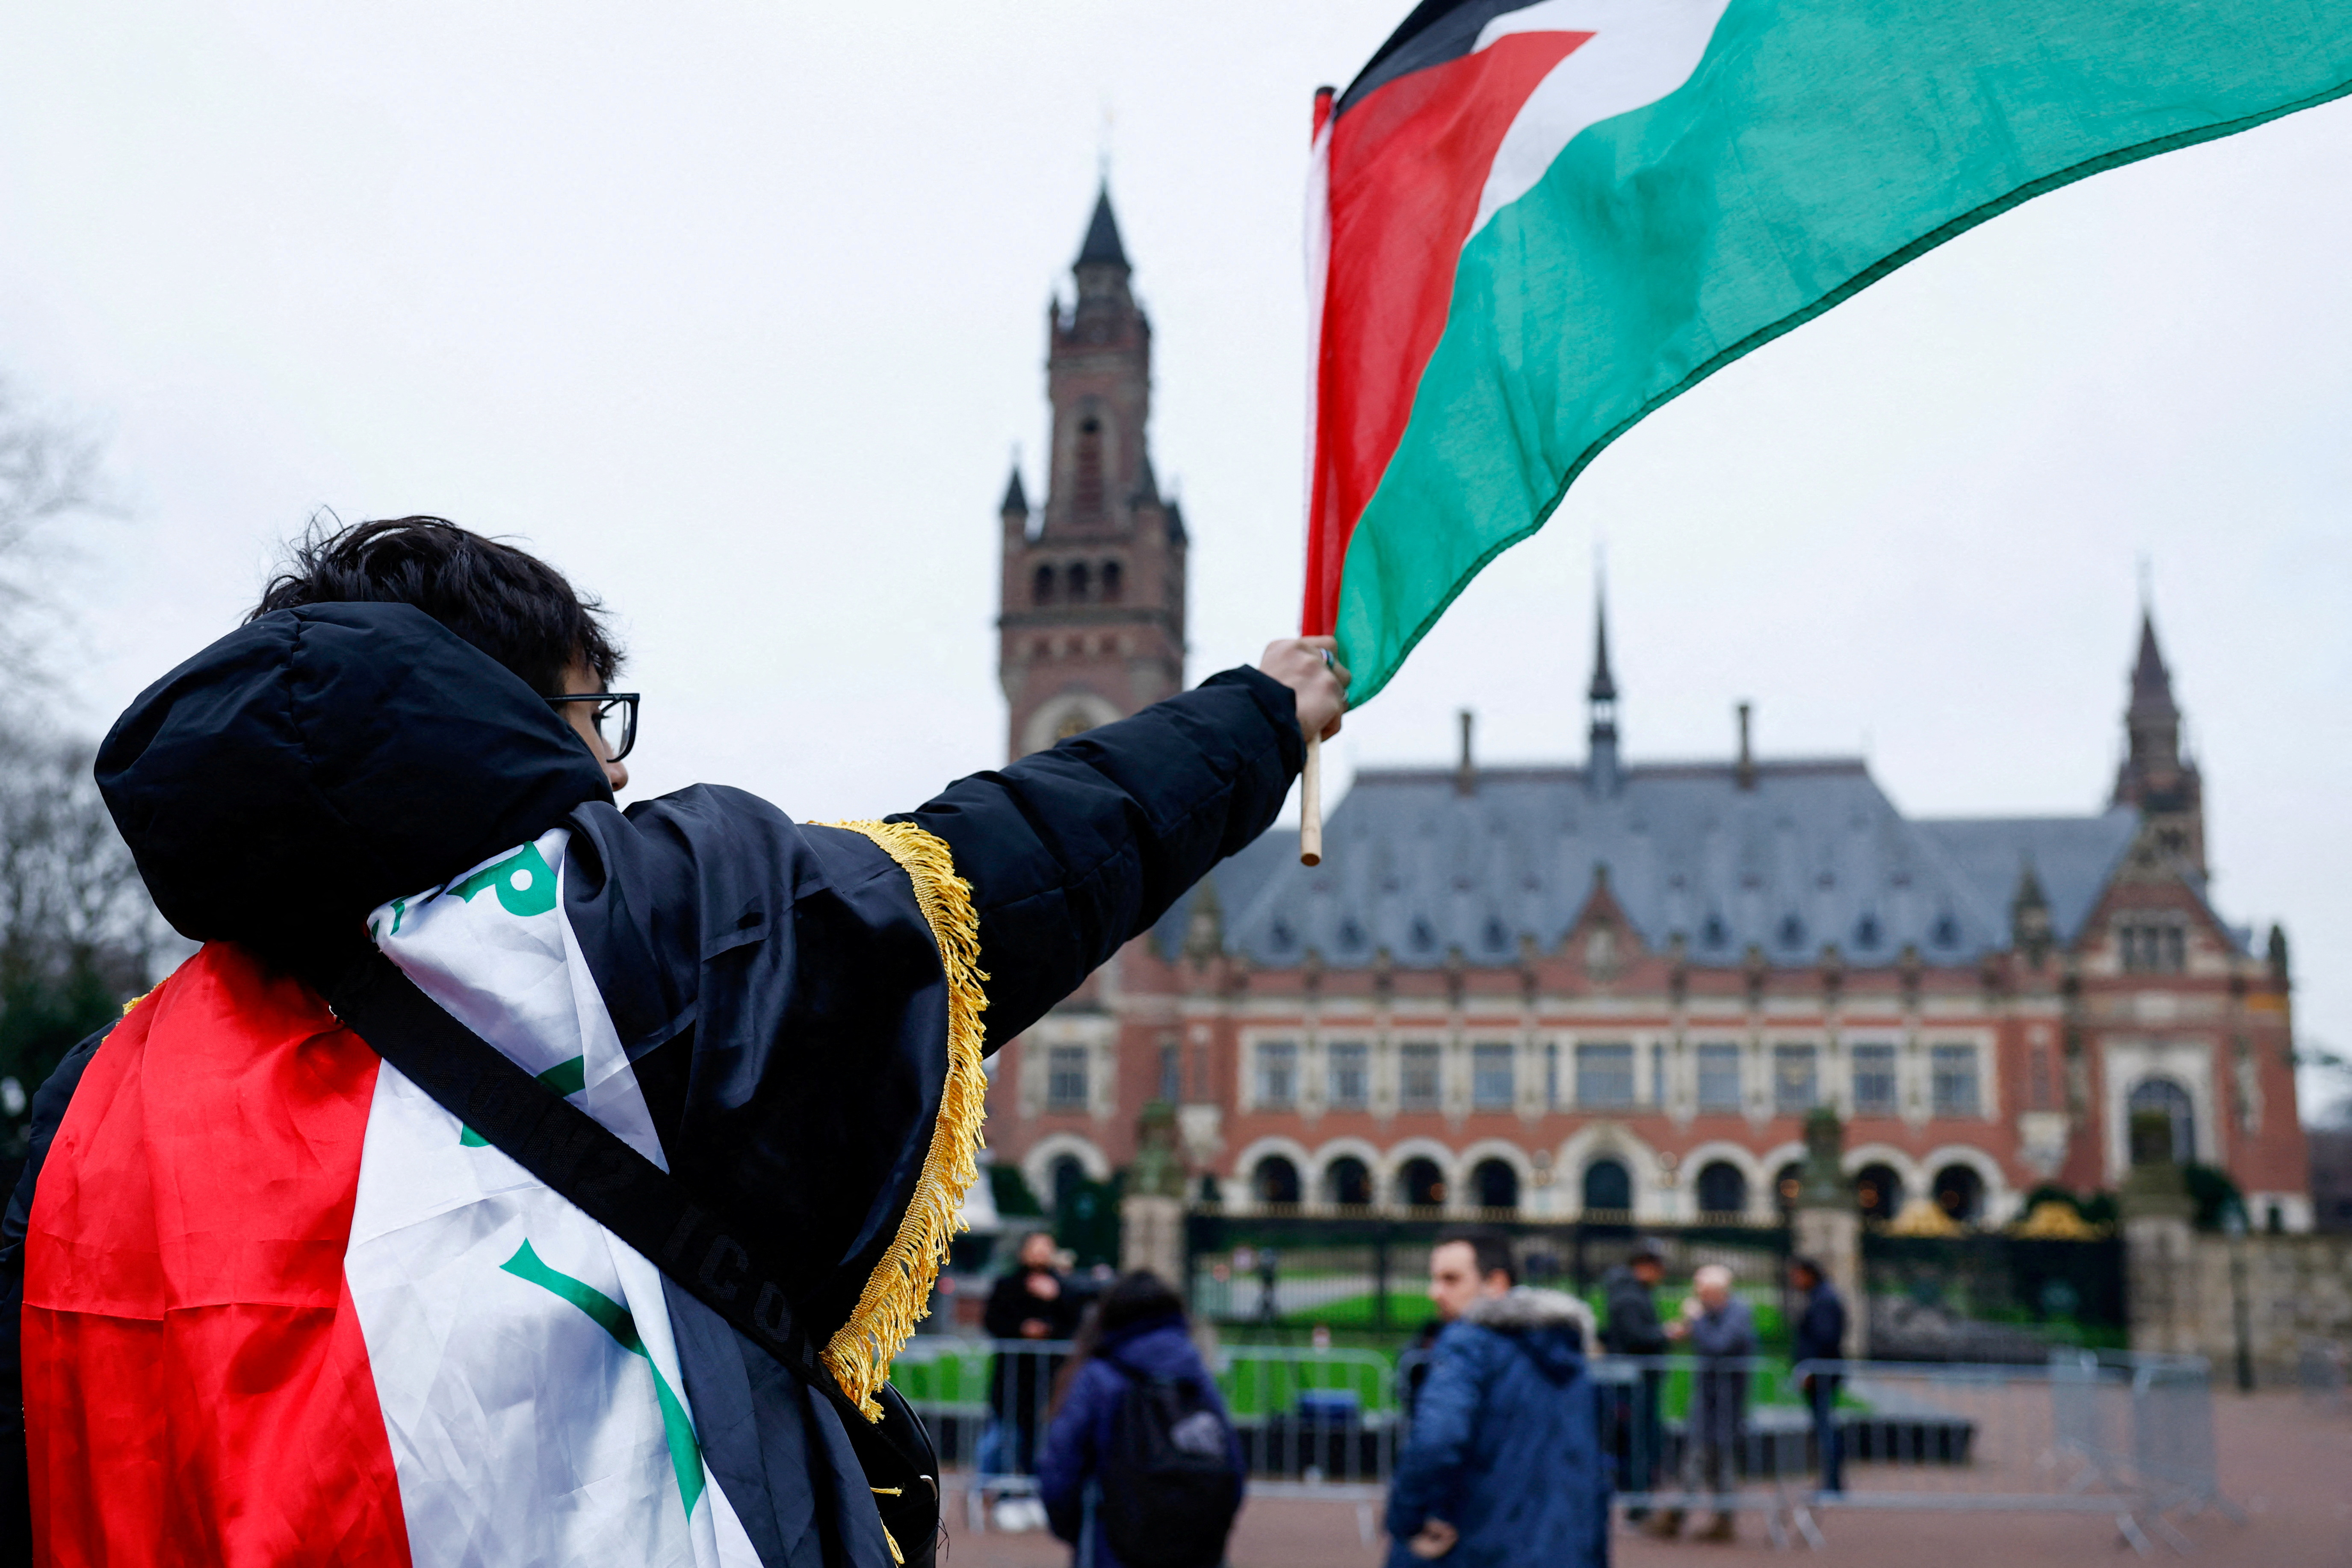 ICJ holds public hearings on the legal consequences of Israel's occupation of Palestinian territories, in The Hague